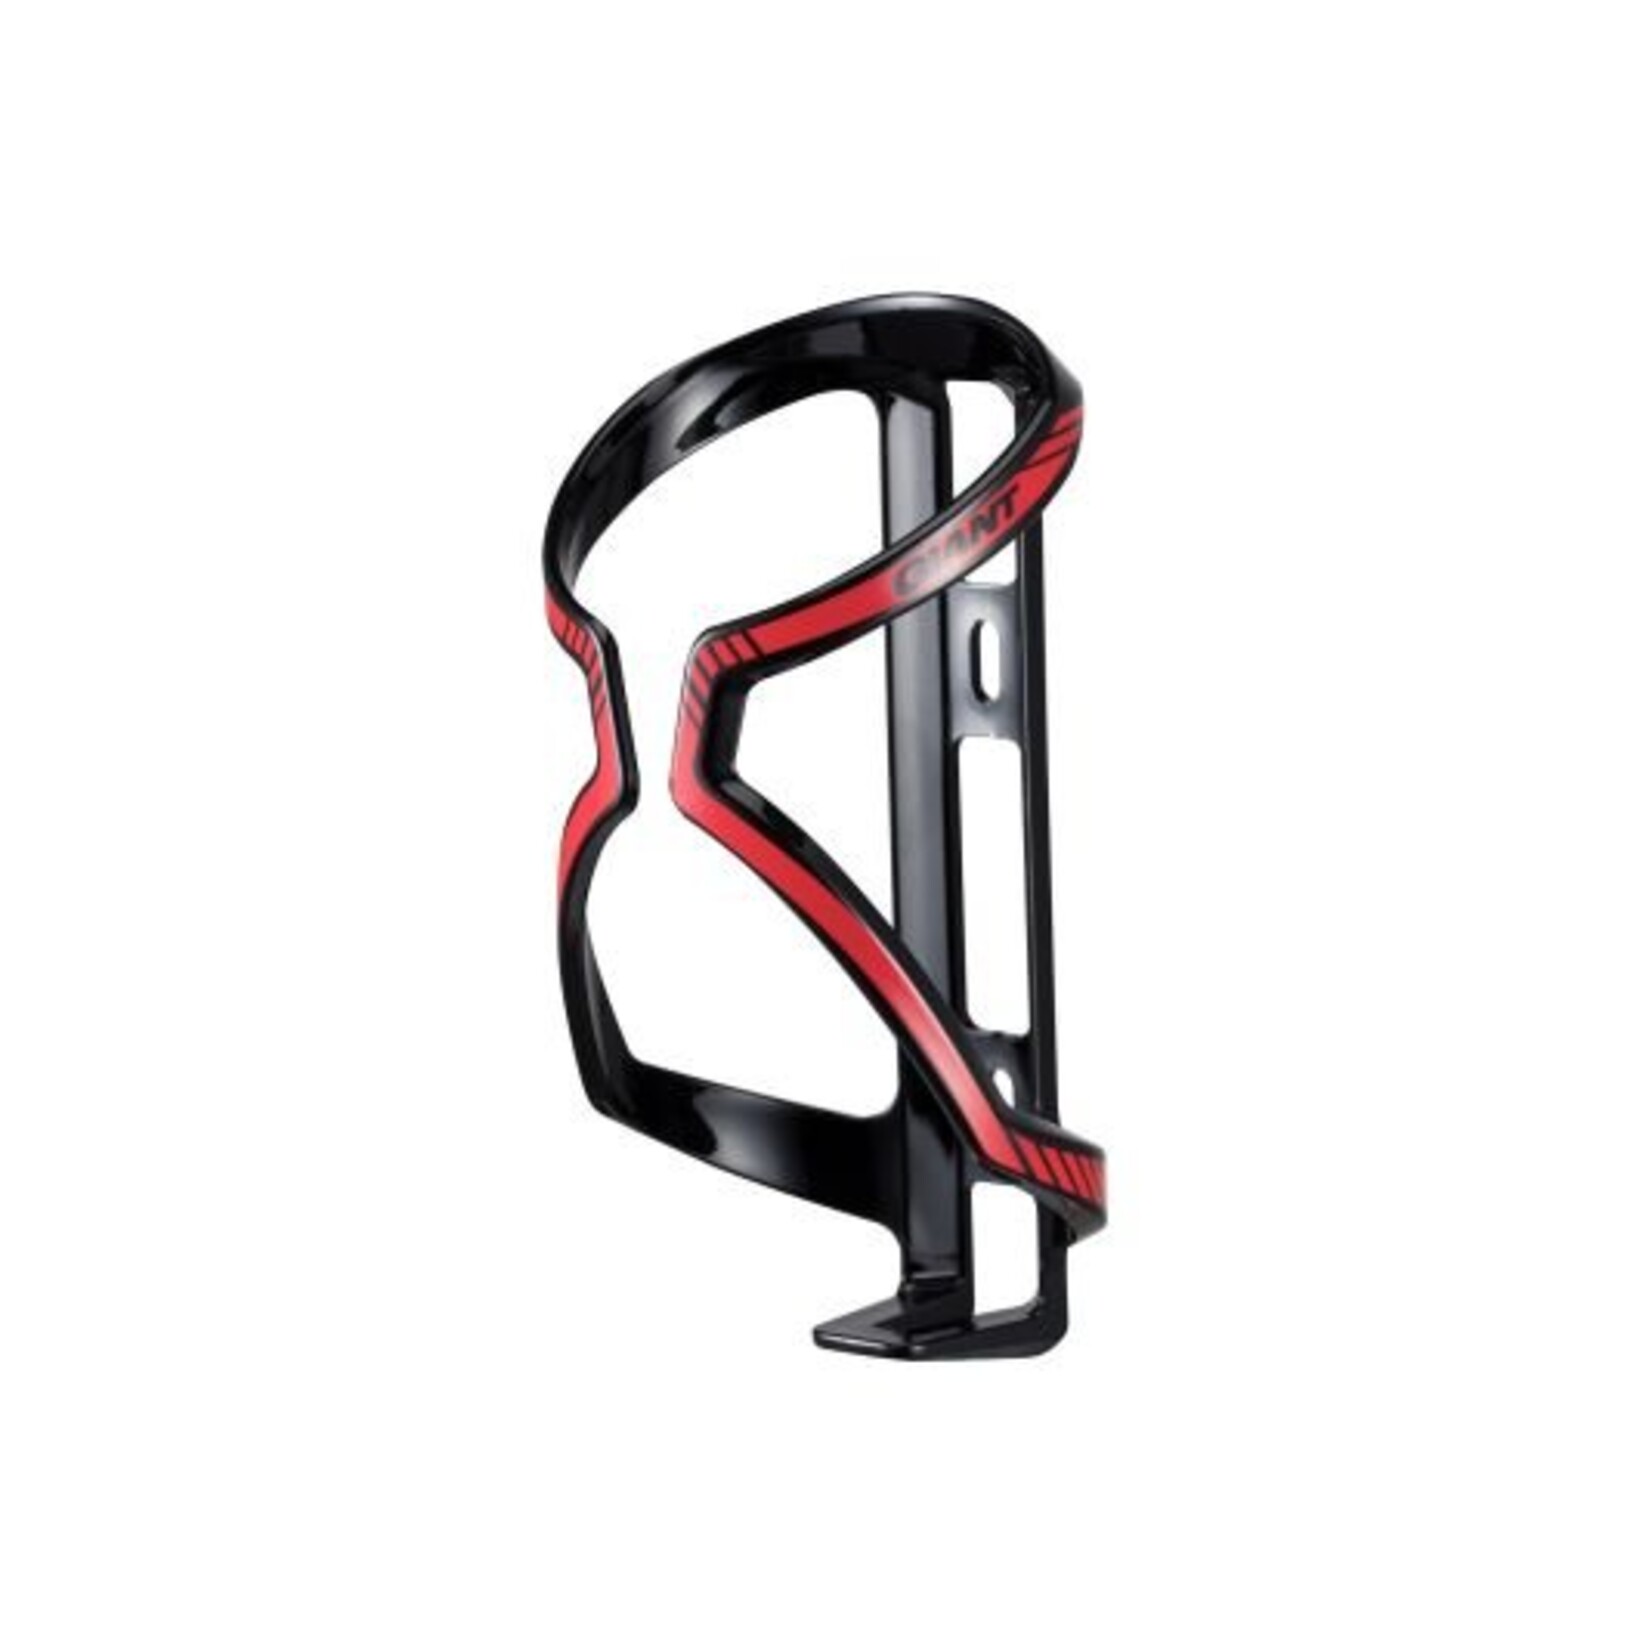 GIANT Airway Bottle Cage